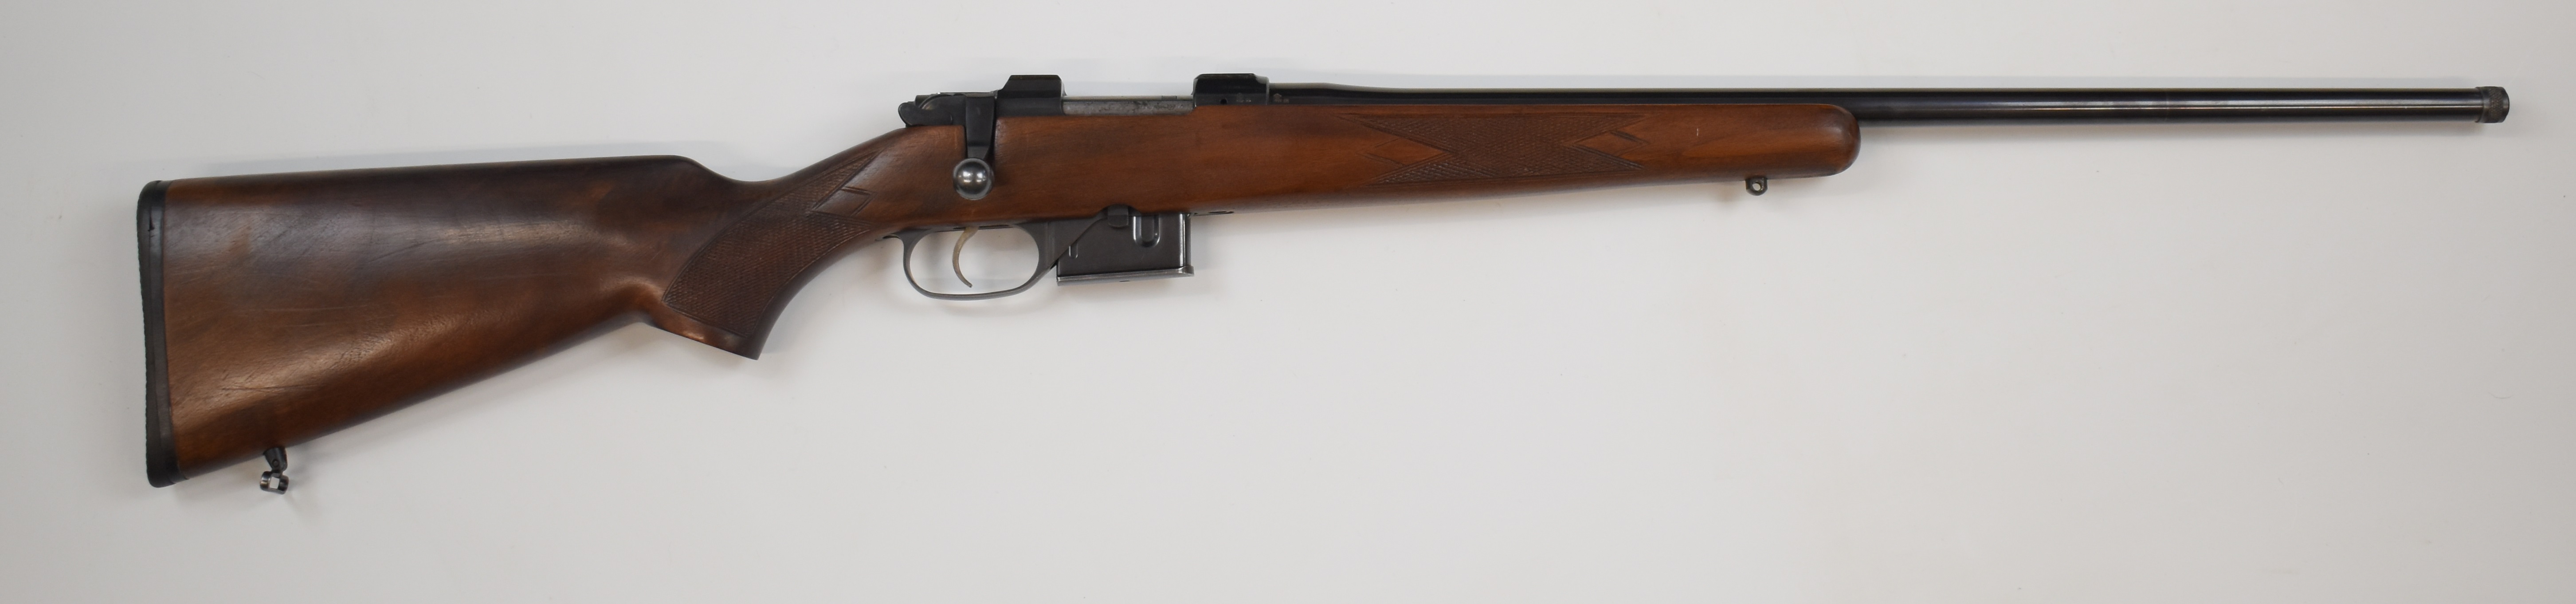 CZ 527 American .222 Remington bolt-action rifle with chequered semi-pistol grip and forend, sling - Image 2 of 10